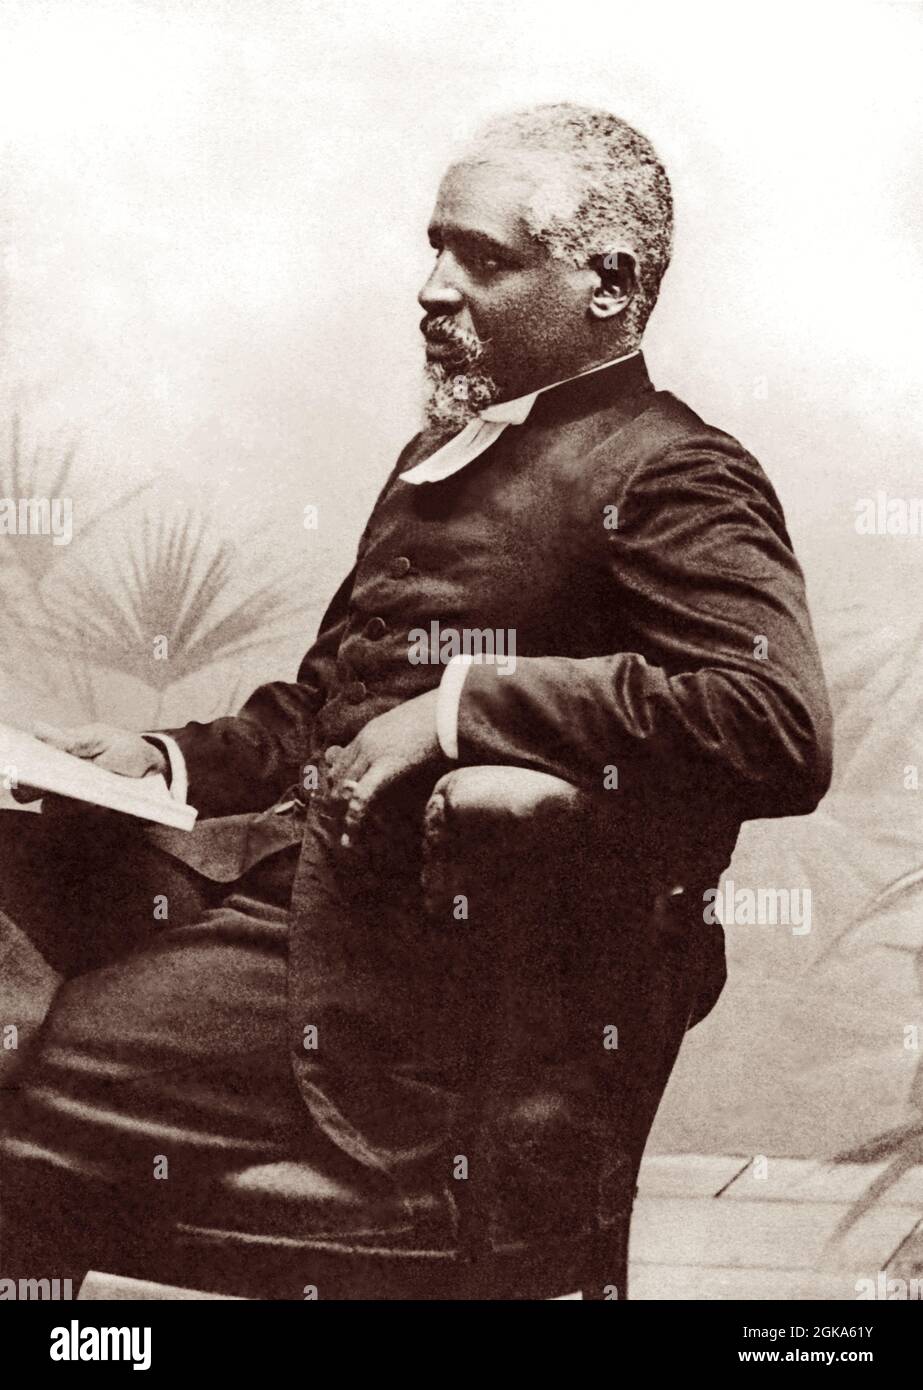 Pastor Twoldo Medhen (Tewolde-Medhin Gebre-Medhin) (1860–1930), evangelical pastor, educator, leader and Bible translator associated with the Swedish Evangelical Mission and the Ethiopian Orthodox Church in East Africa. Stock Photo